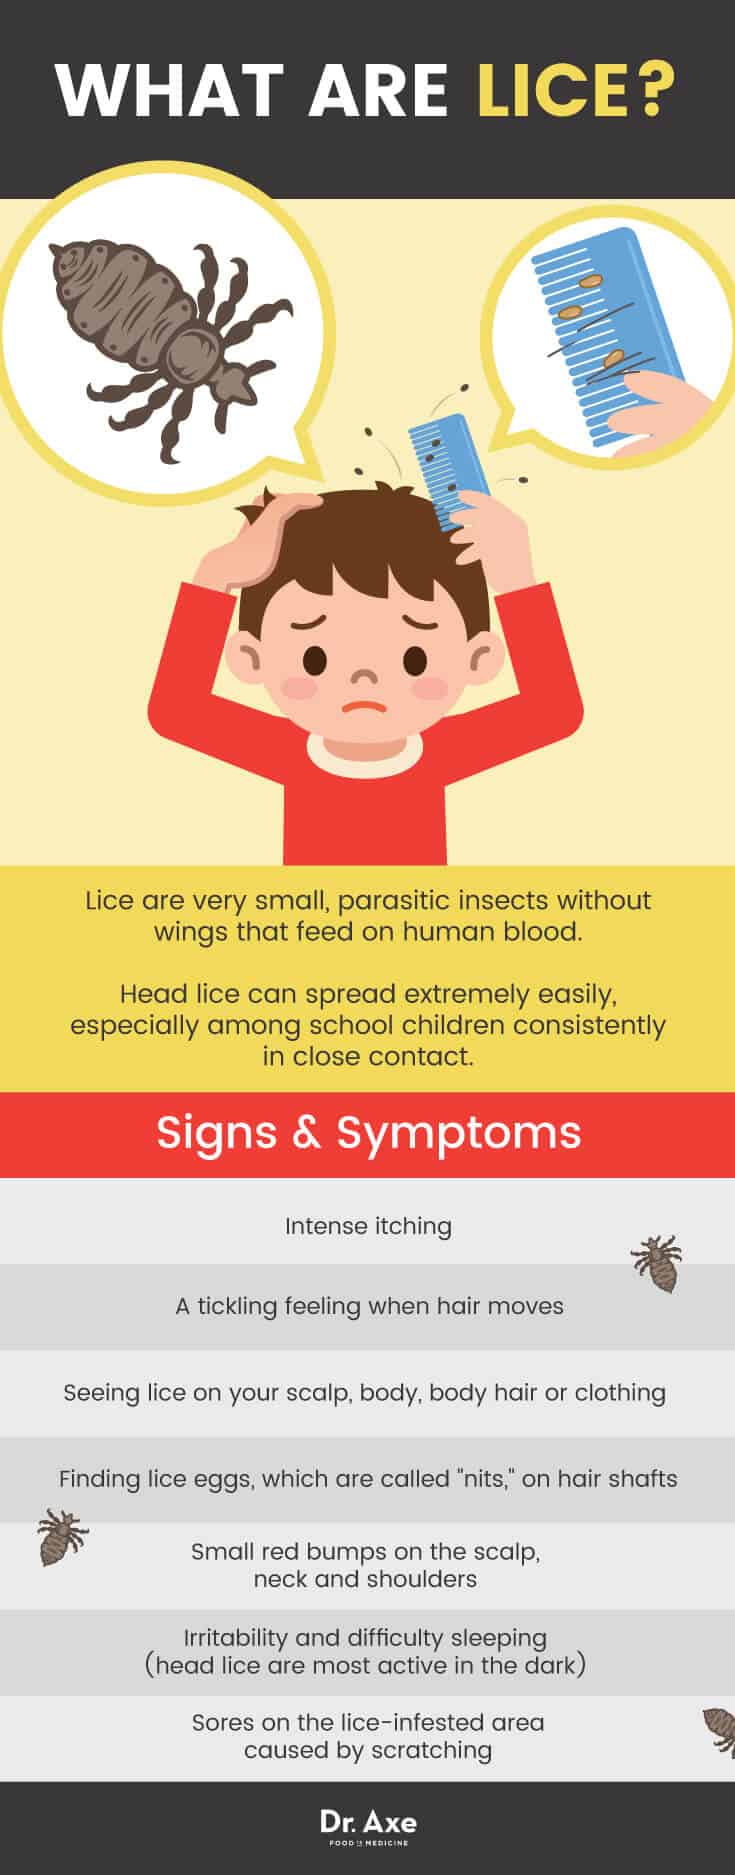 8 Remedies and Treatments to Get Rid of Lice - Dr. Axe